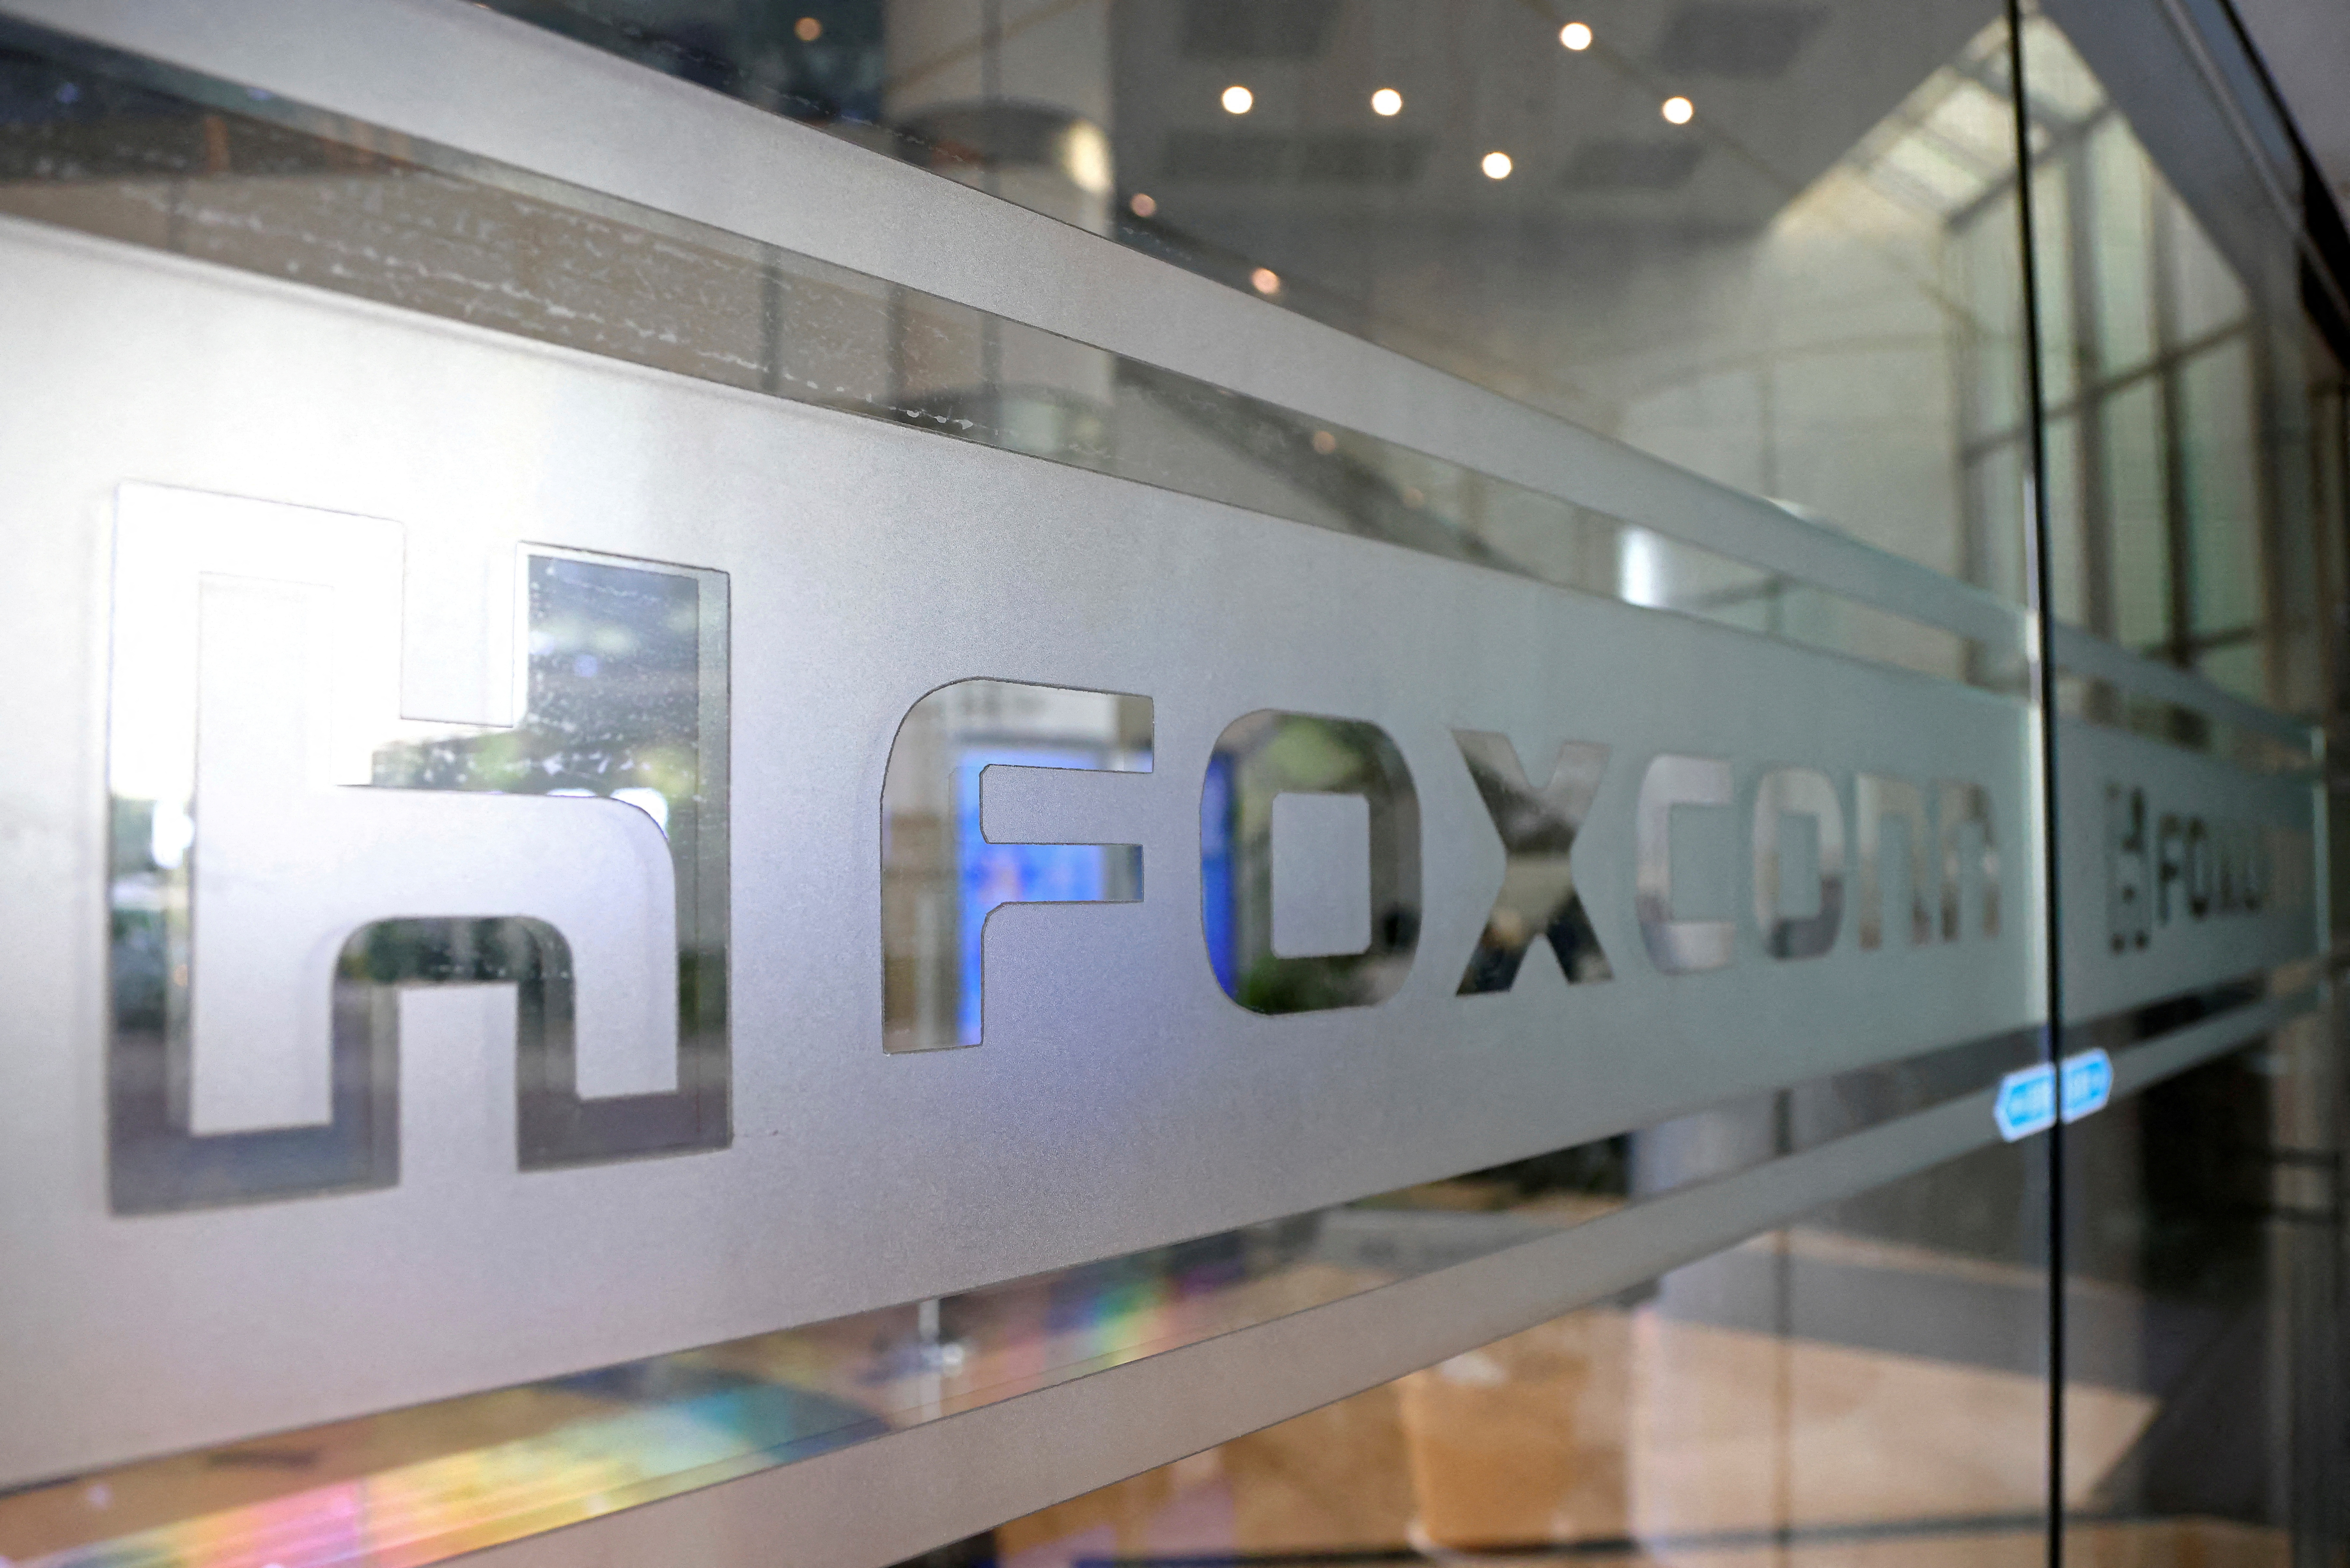 The Foxconn logo appears on the glass door of an office building in Taipei.